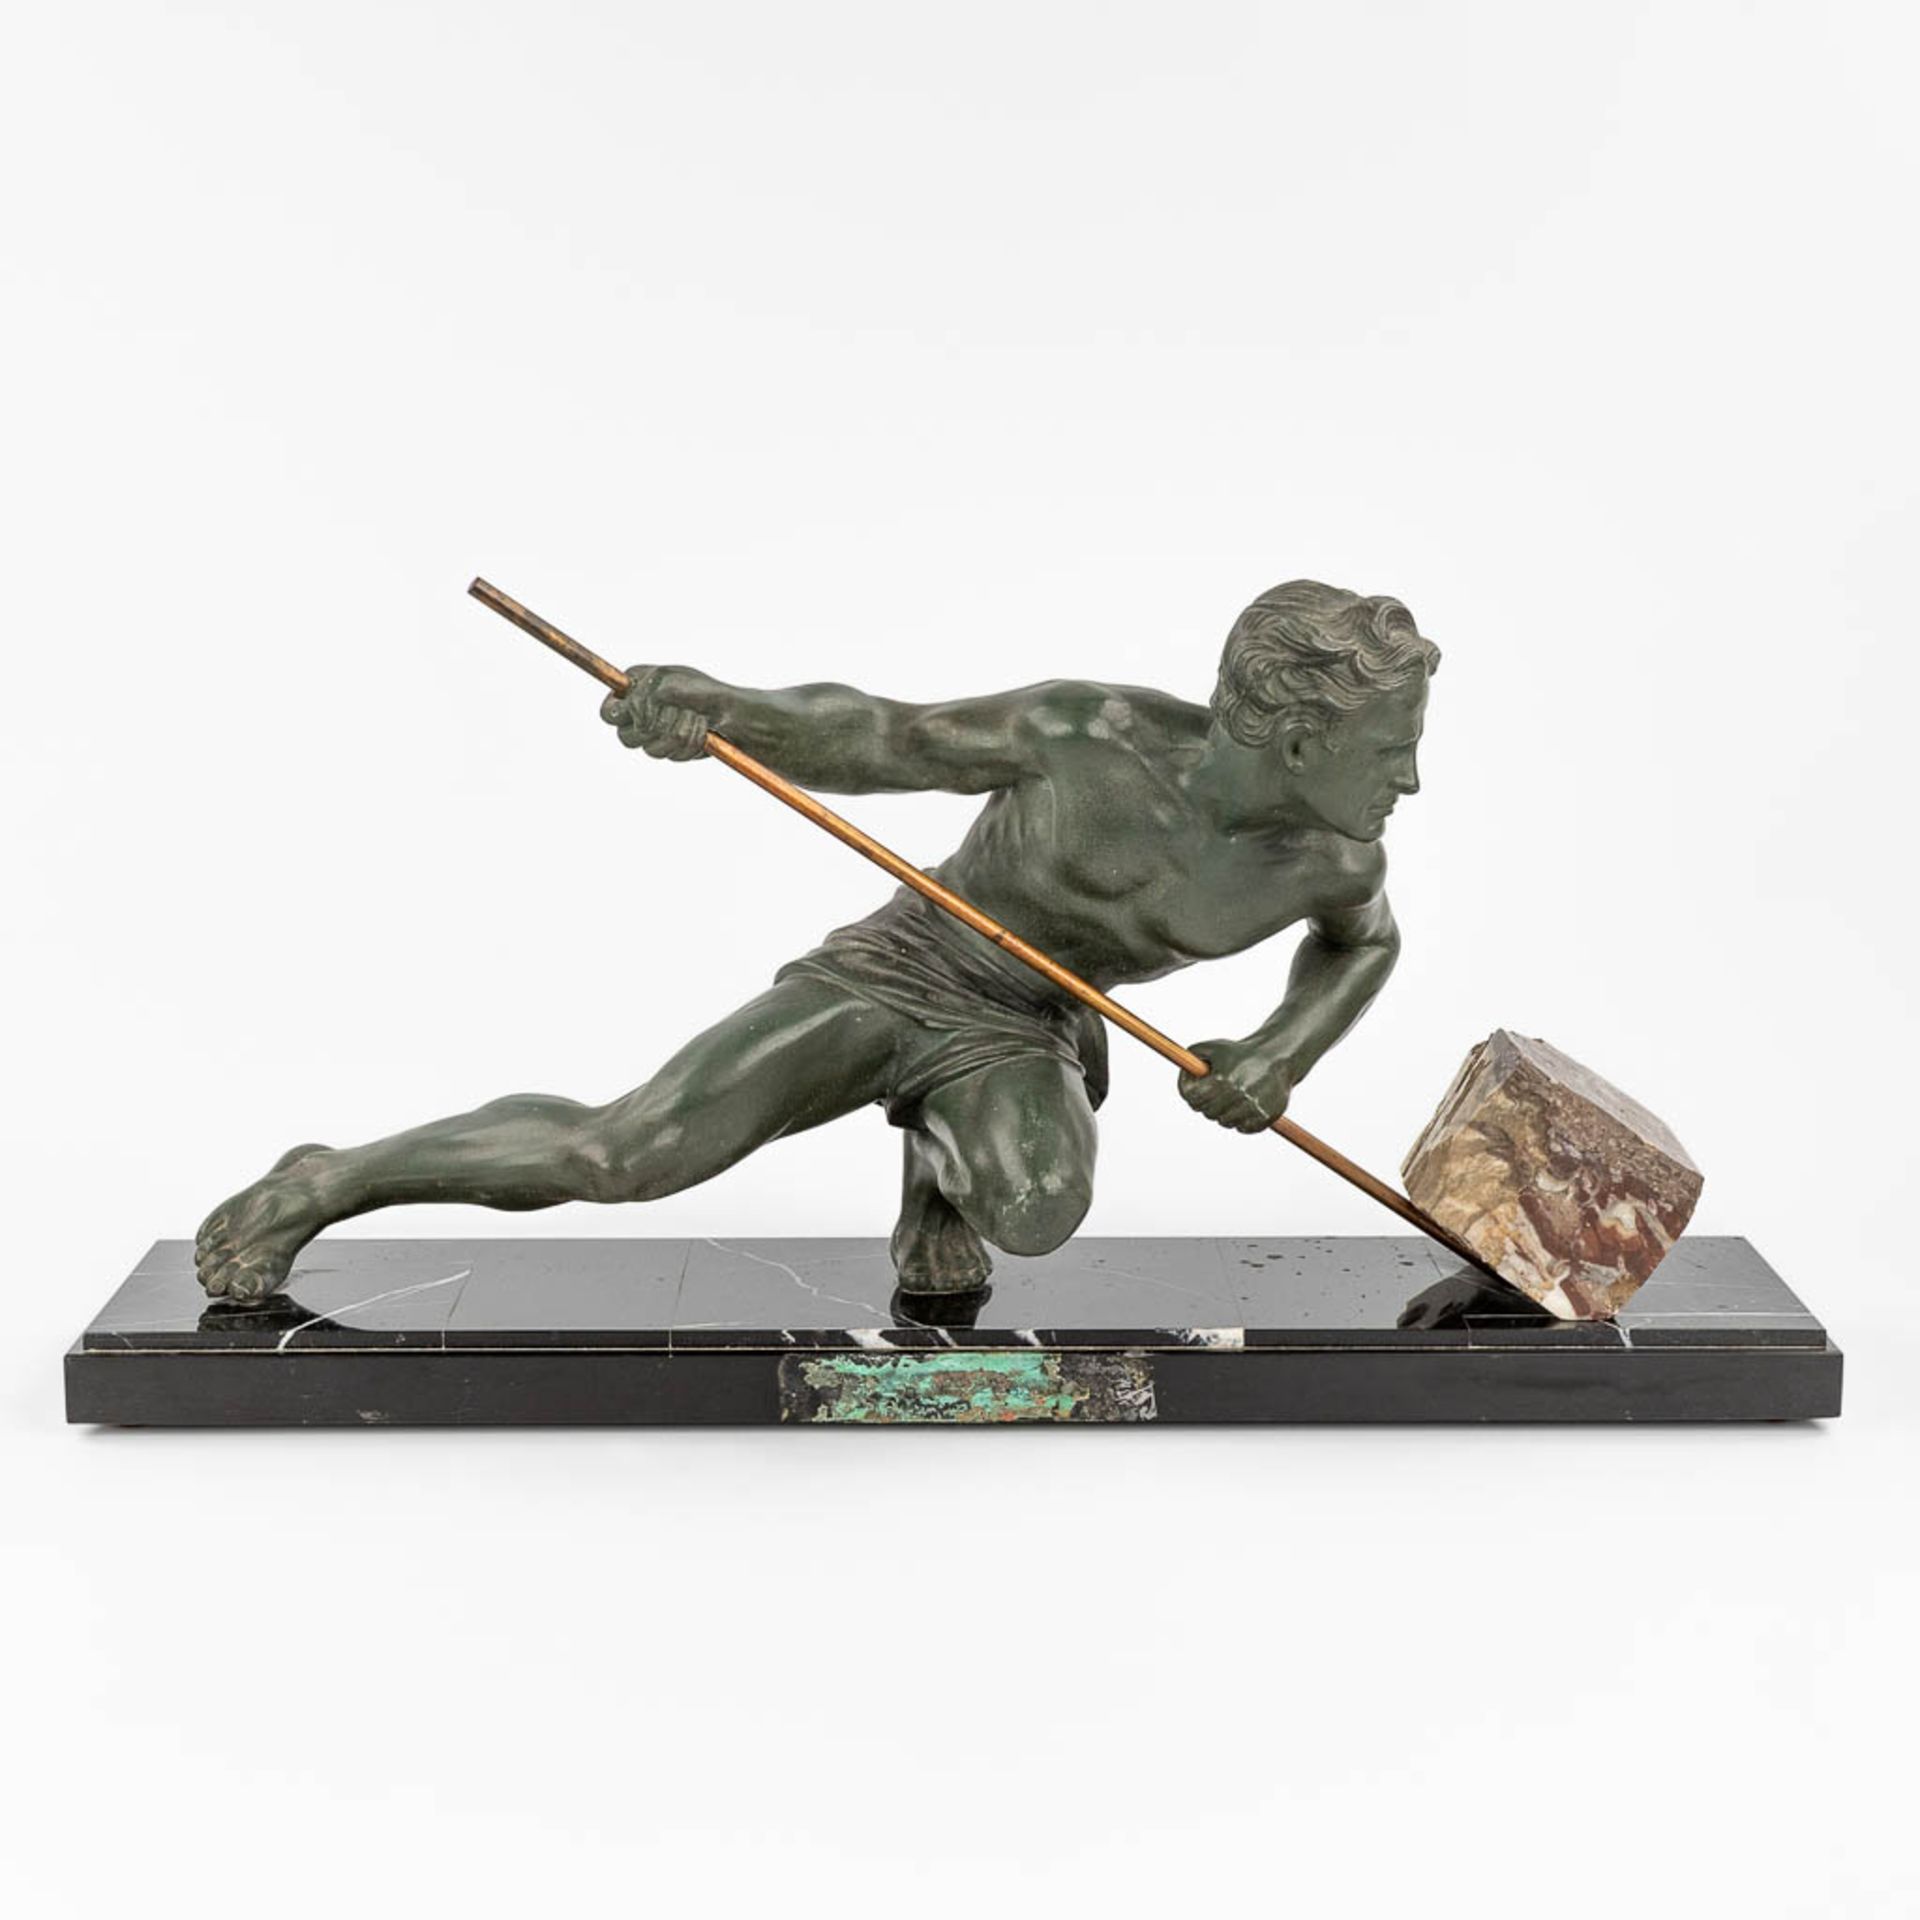 Gustave BUCHET (1888-1963) 'The Athlete' a statue made of spelter on a marble stand. (20 x 74 x 36cm